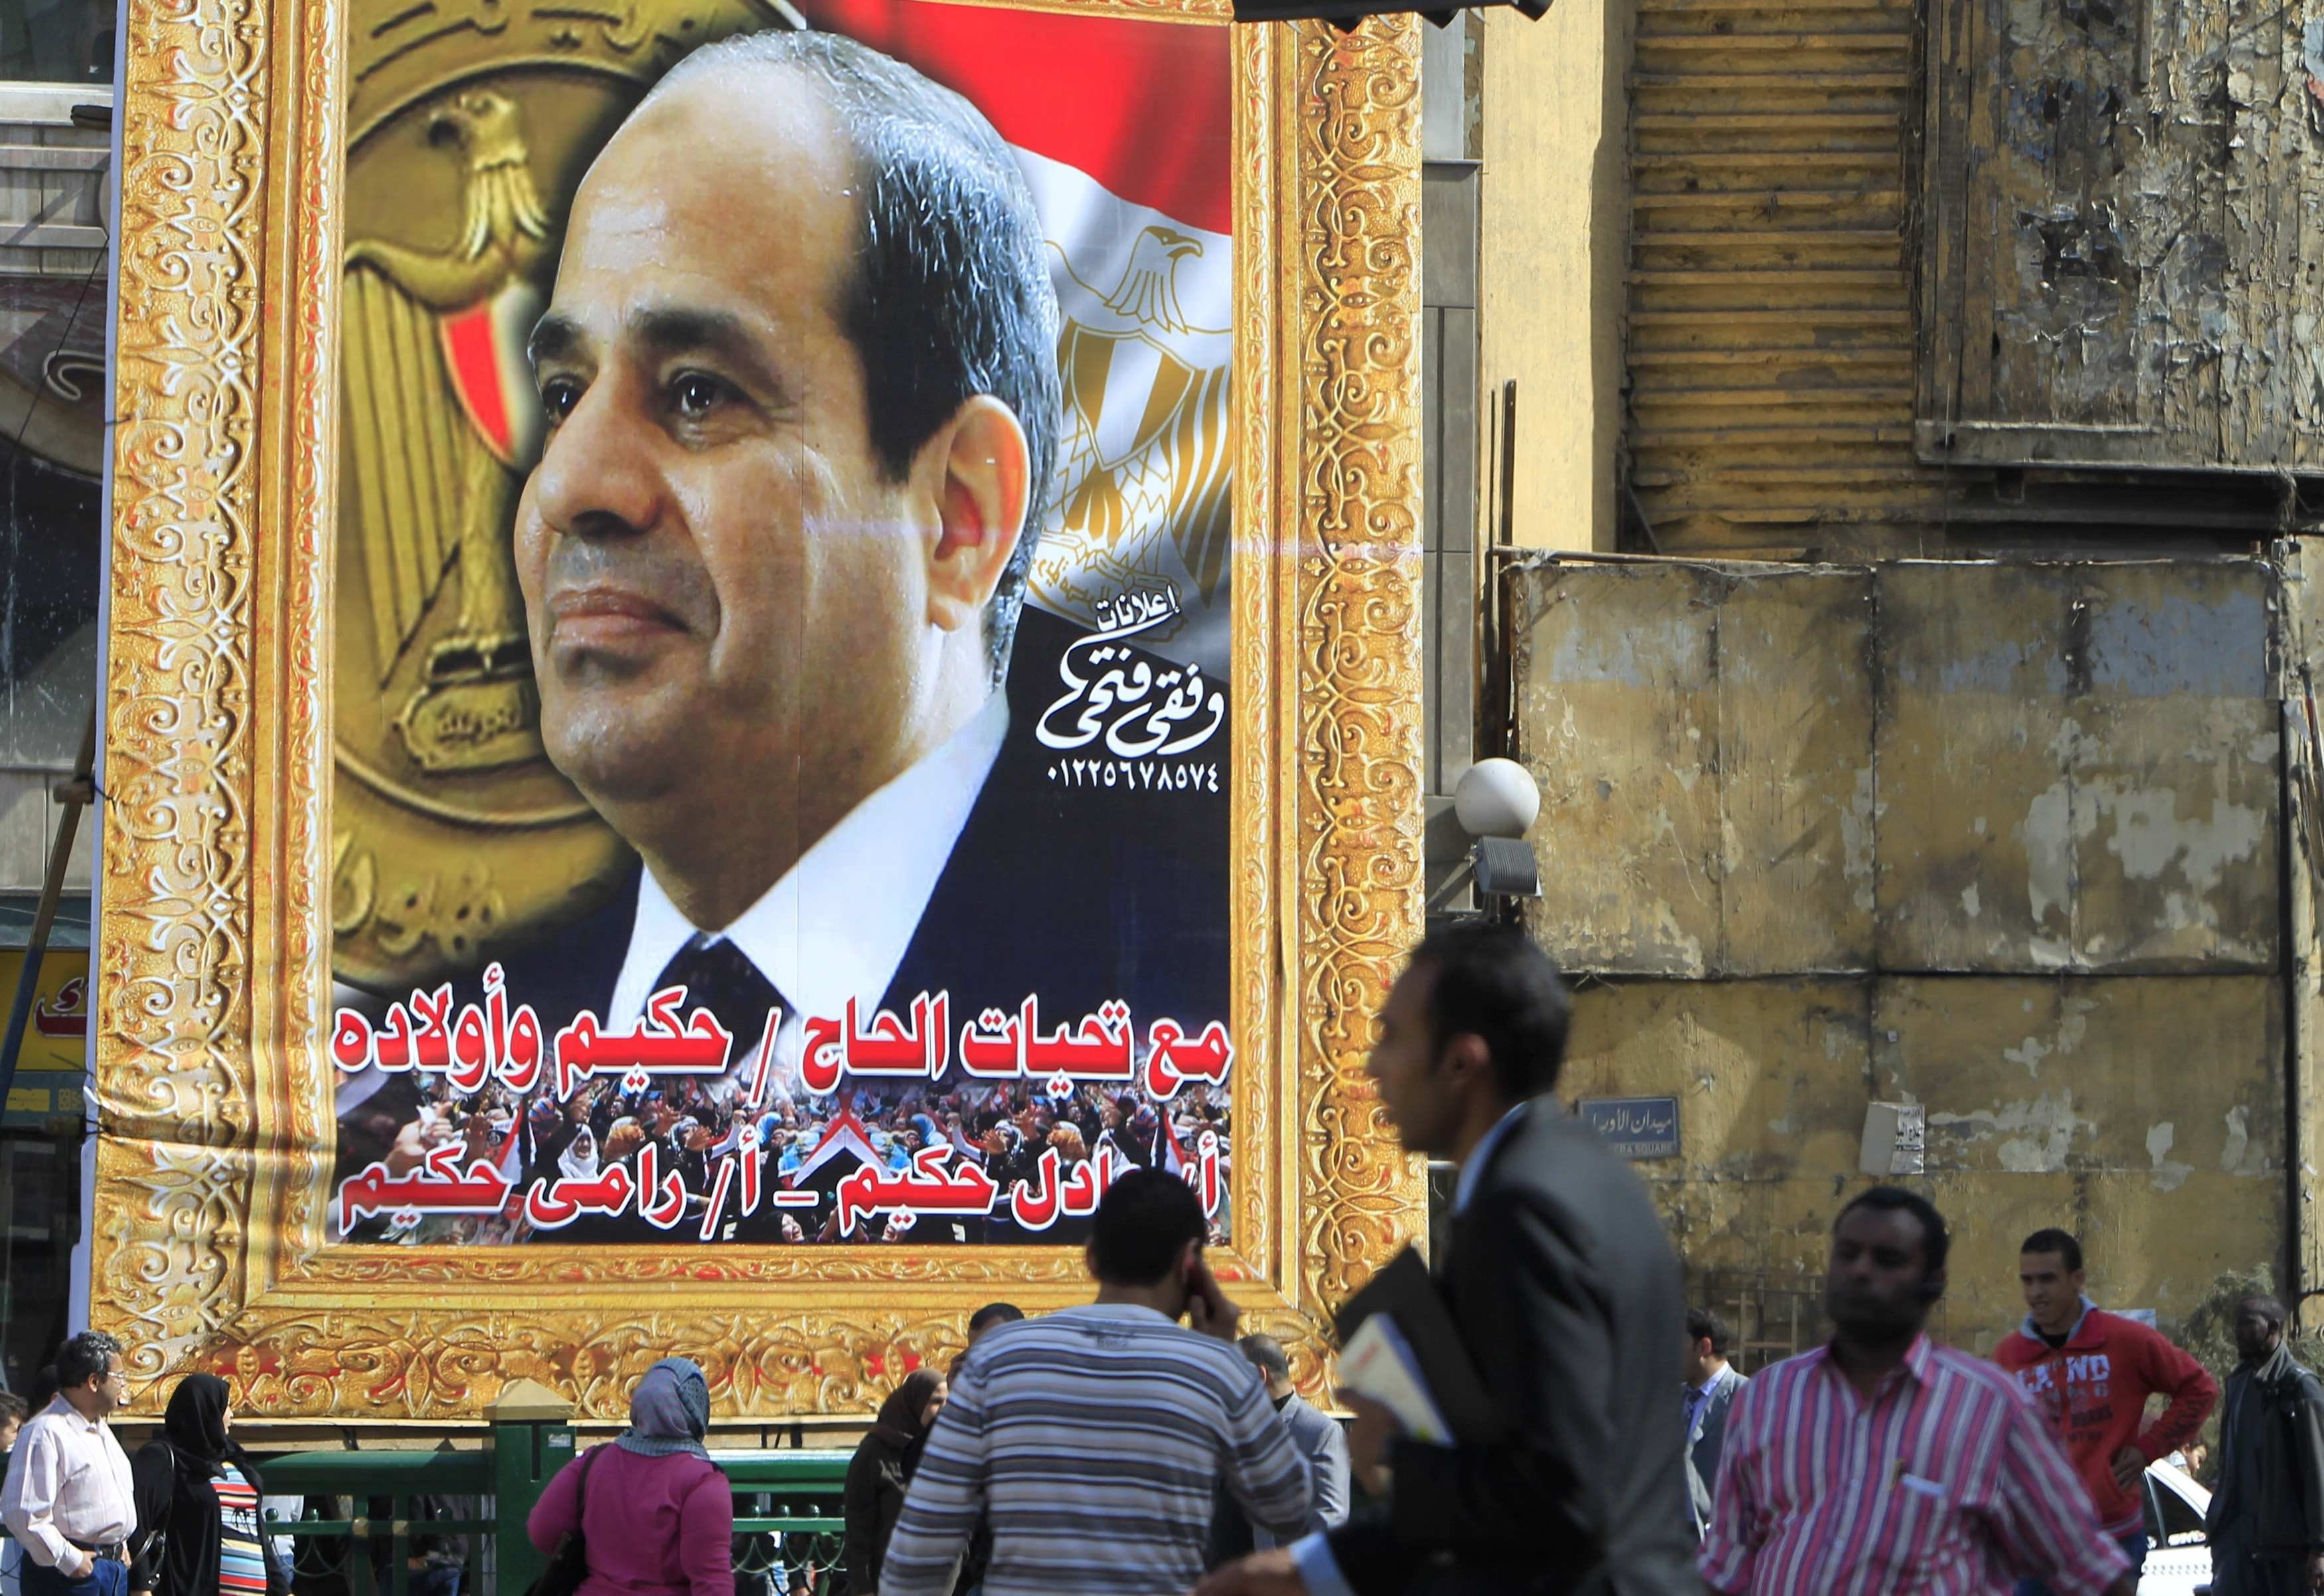 People walk past a banner for Egypt's army chief Field Marshal Abdel Fattah al-Sisi in downtown Cairo March 26, 2014.